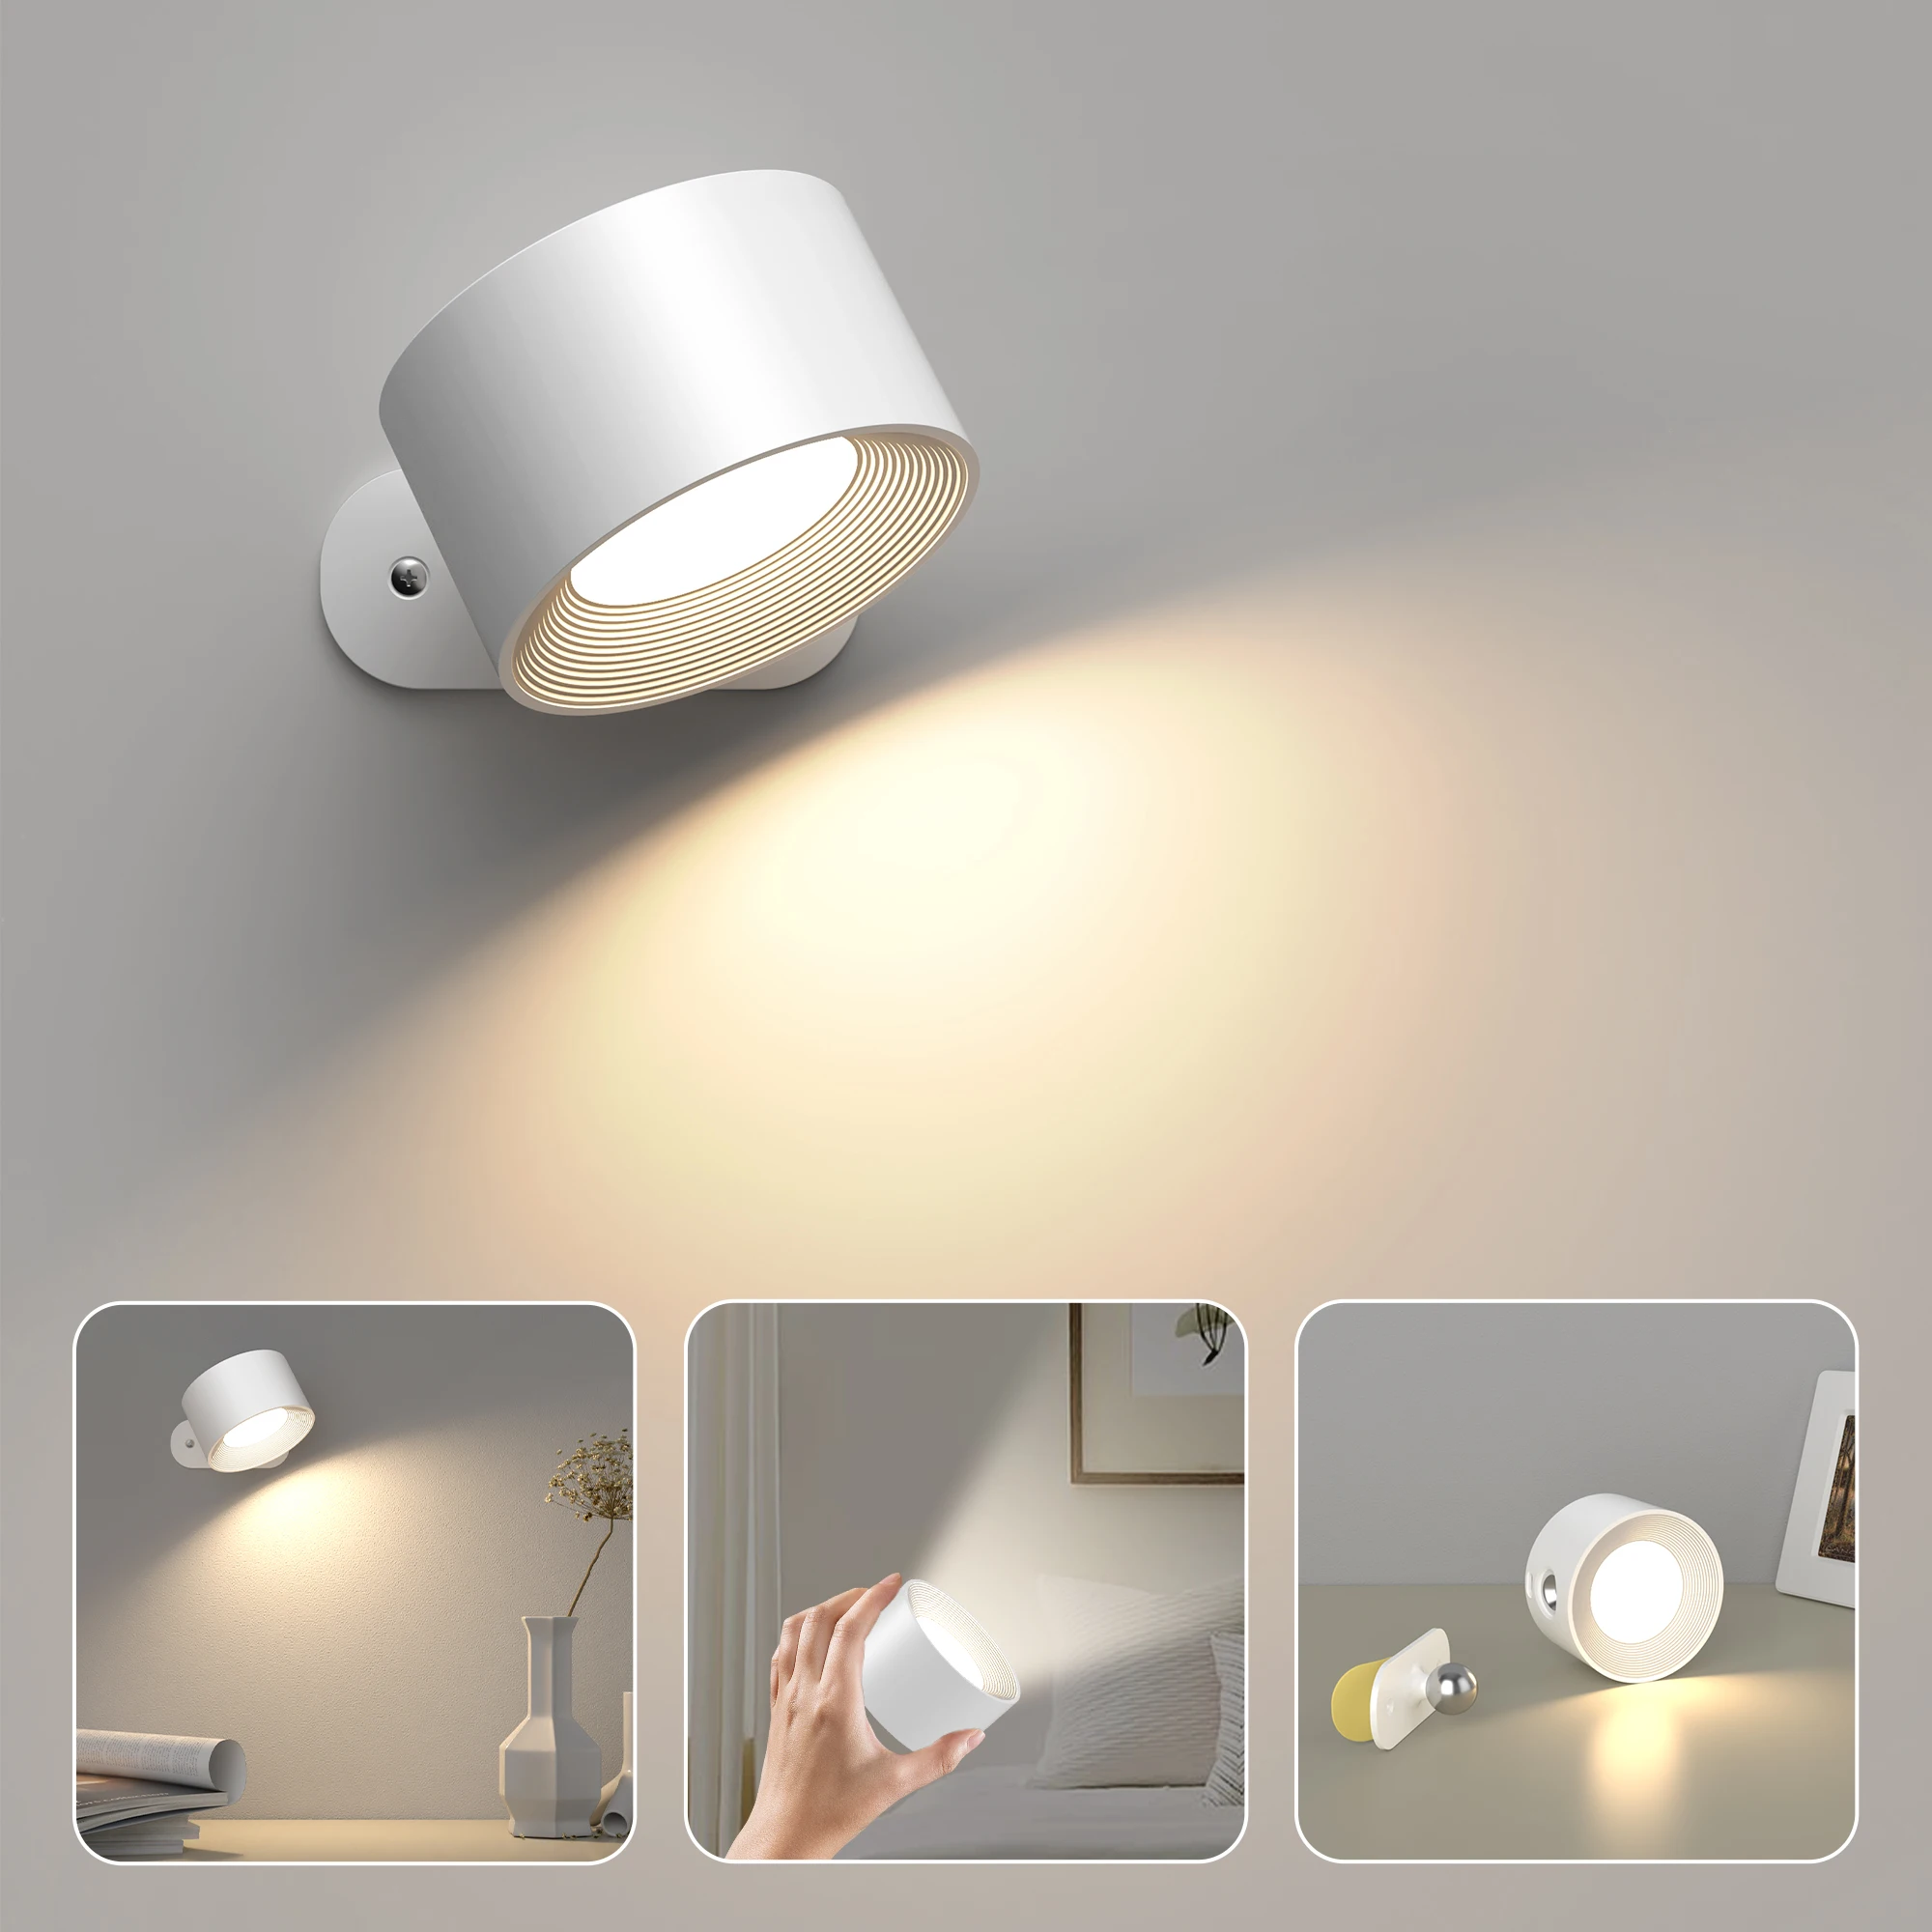 LED Wall Sconces light, 3 Brightness Levels 3 Color Modes Wall Lights, 2000mAh Battery Operated 360° Rotatable Touch Control